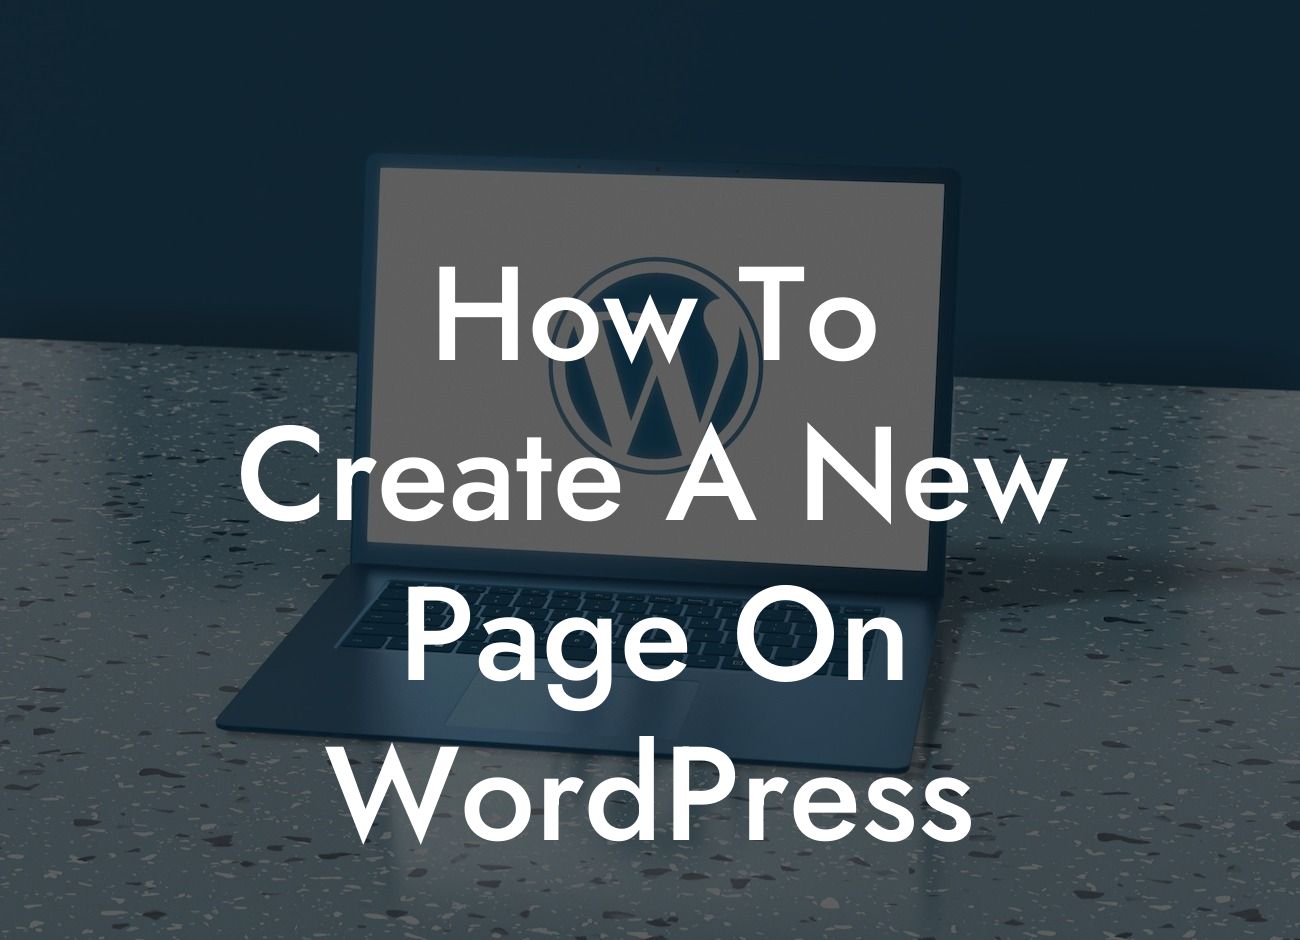 How To Create A New Page On WordPress